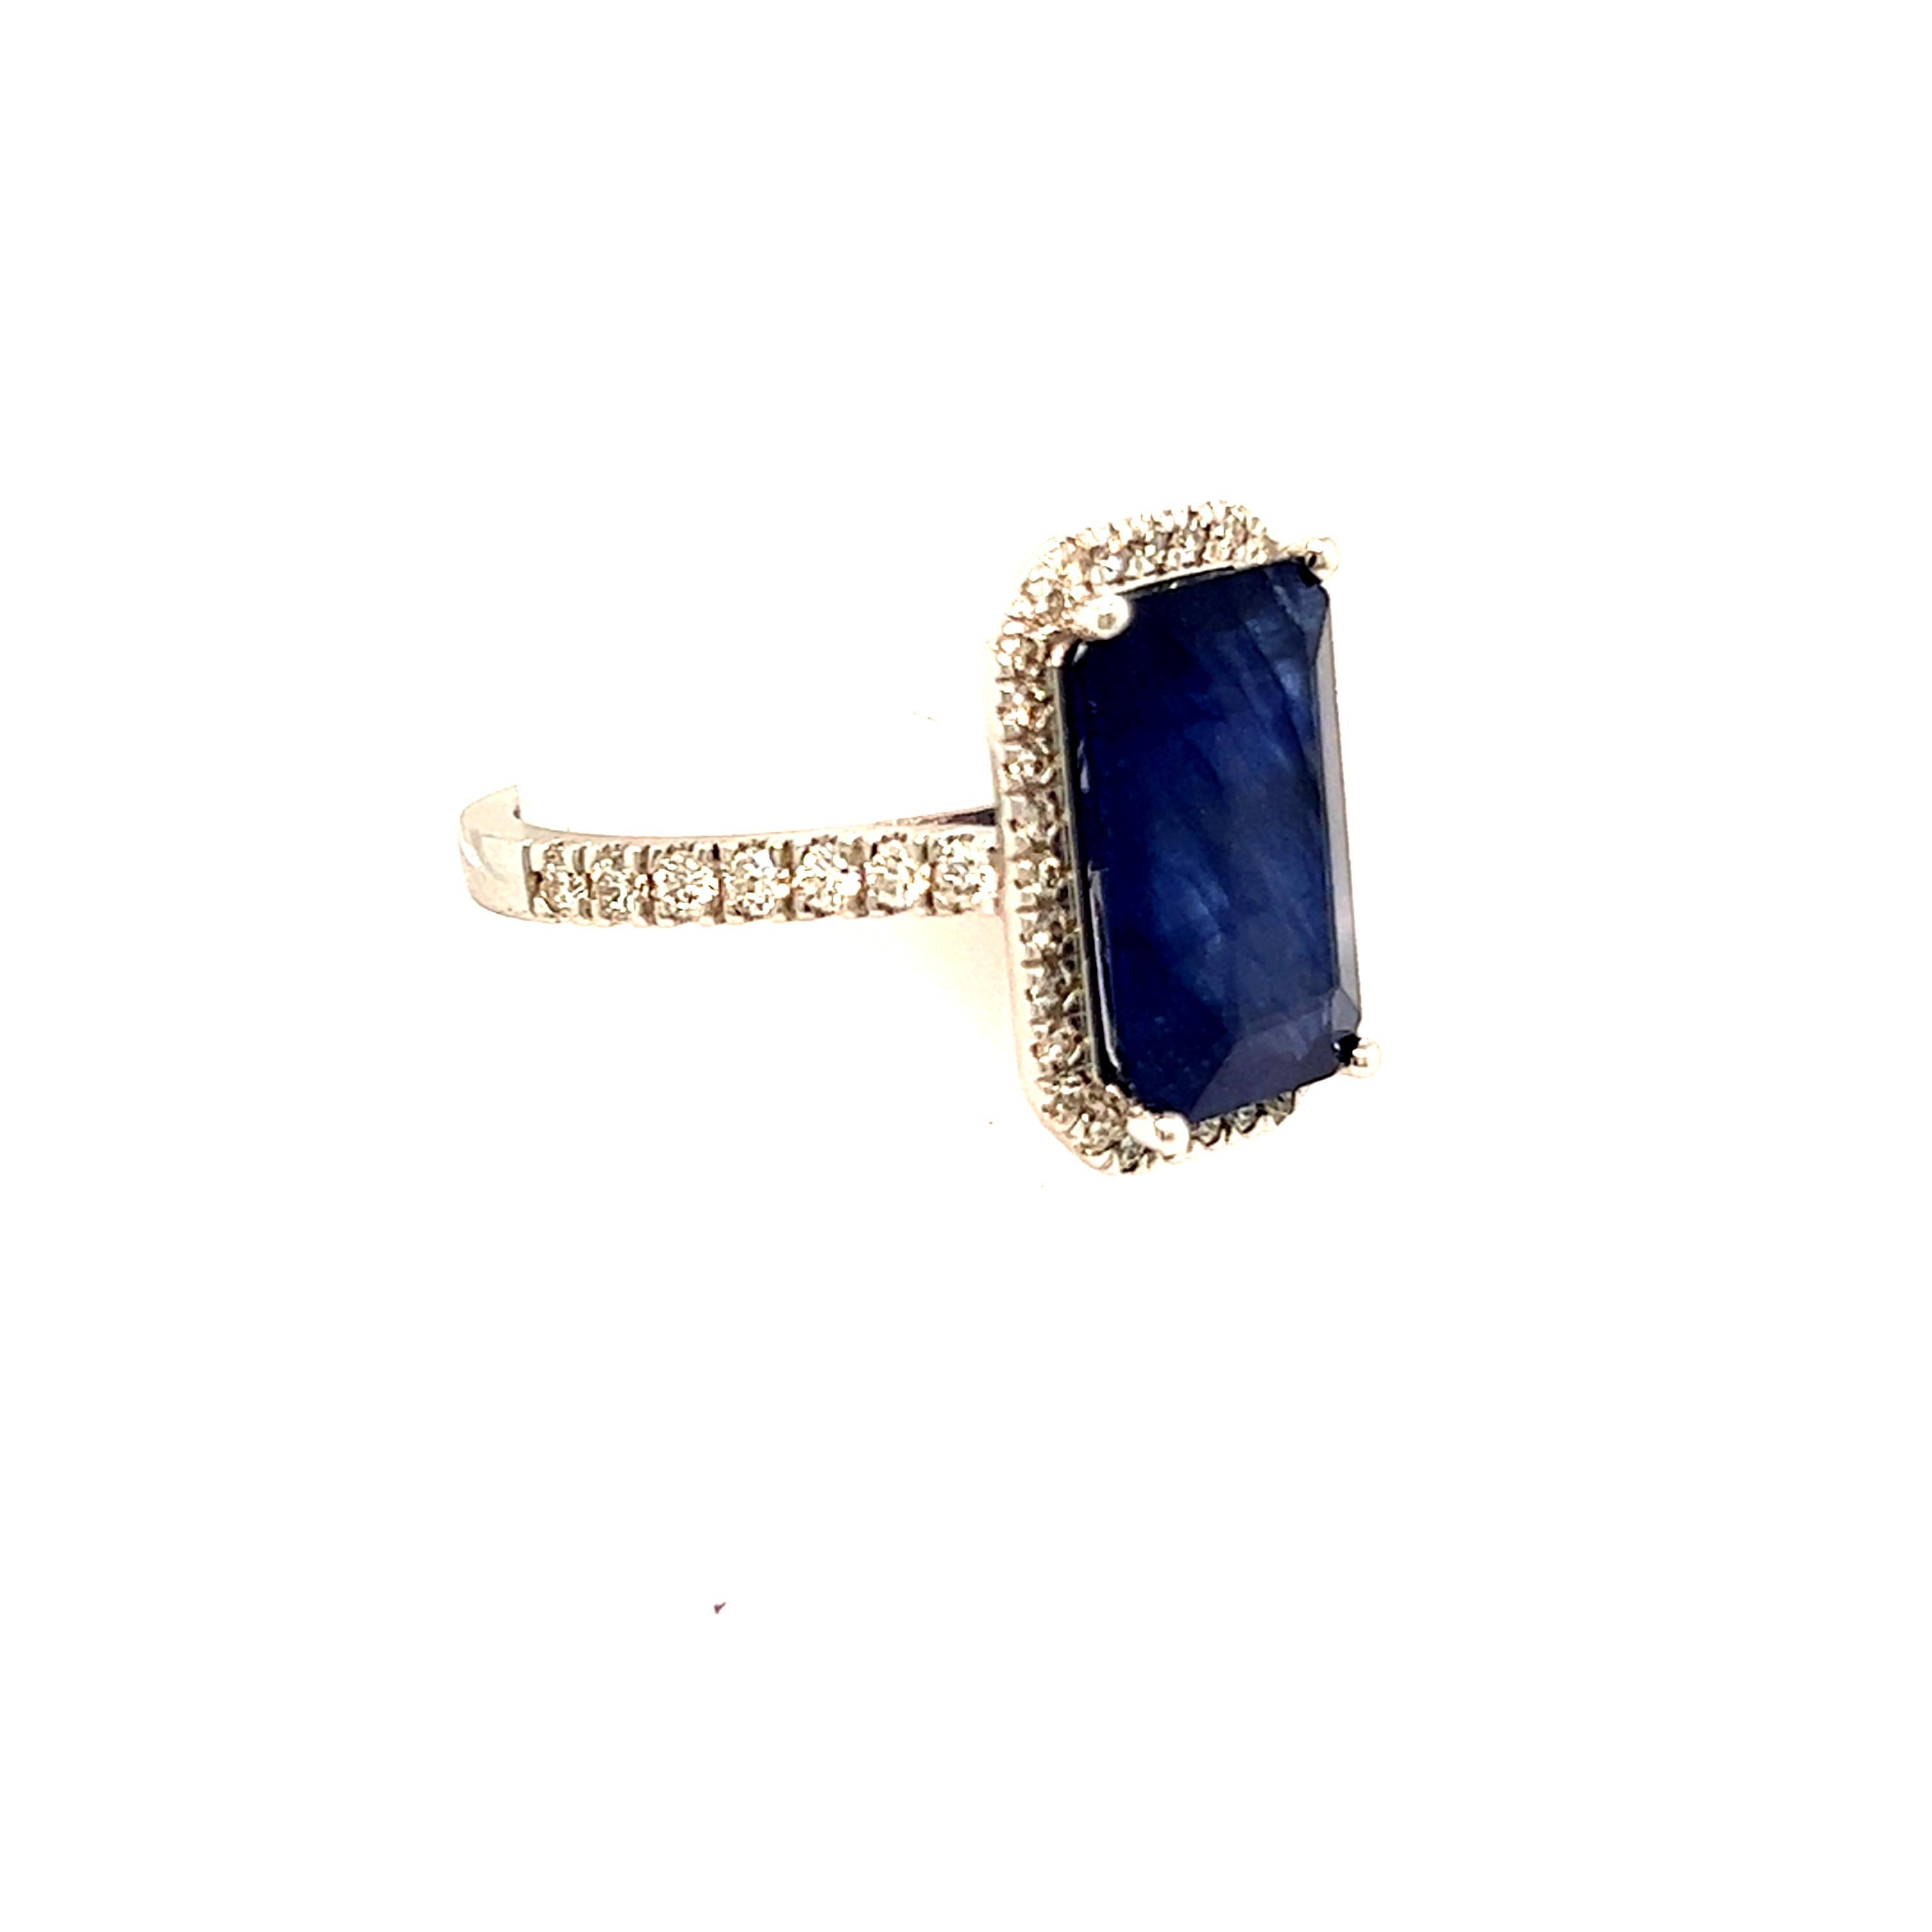 Sapphire Diamond Ring Size 6.25 14k Gold 6.84 TCW Certified For Sale 1